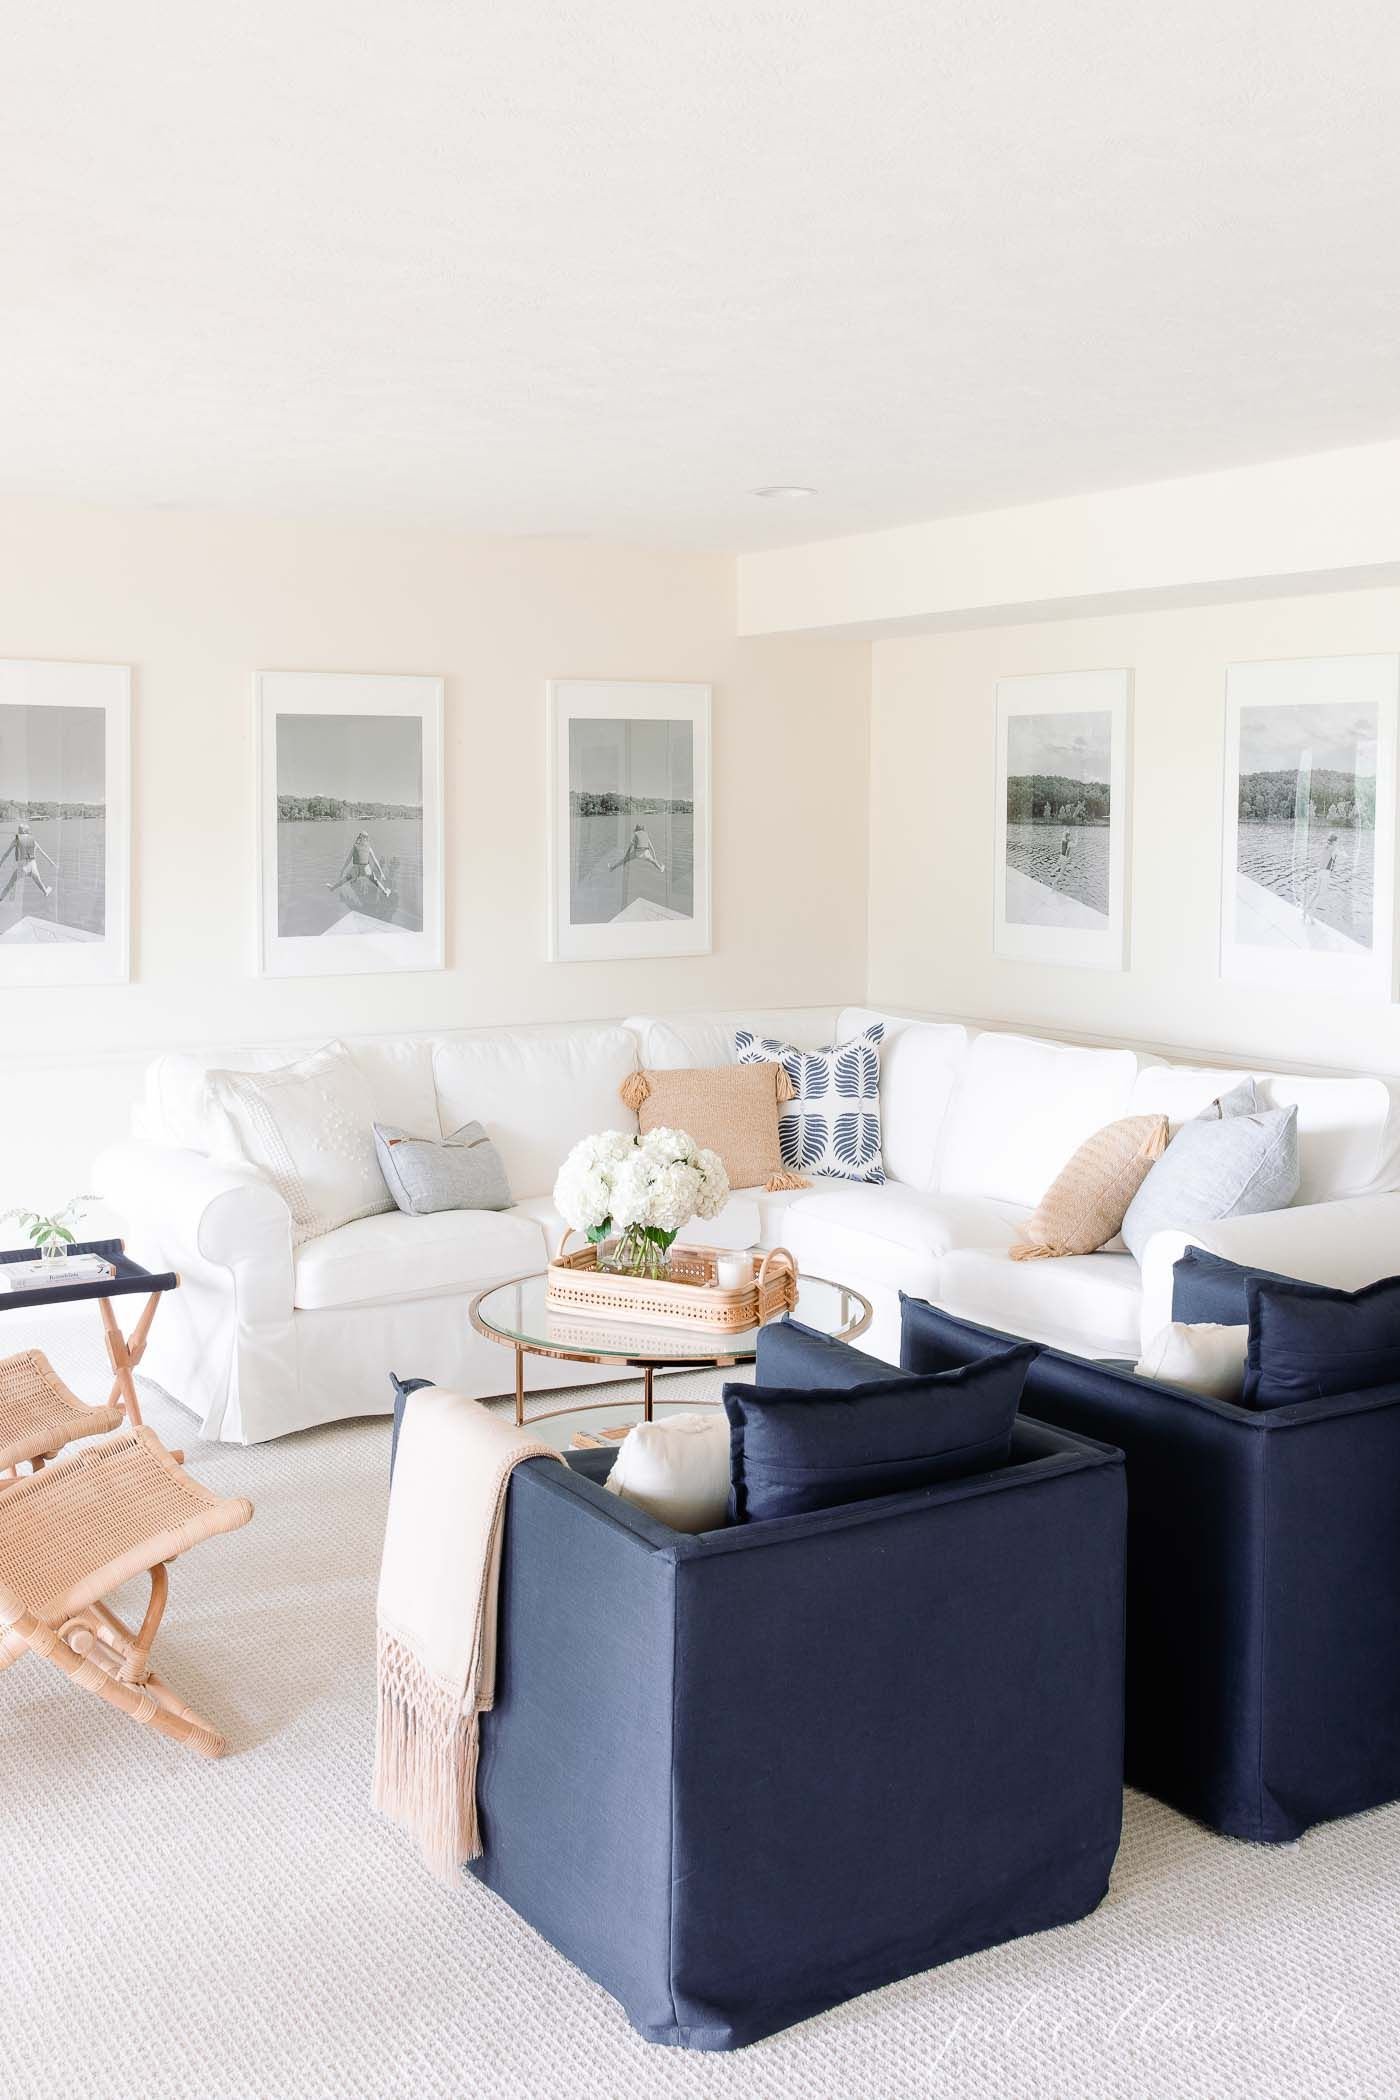 A white living room with blue and white pillow covers